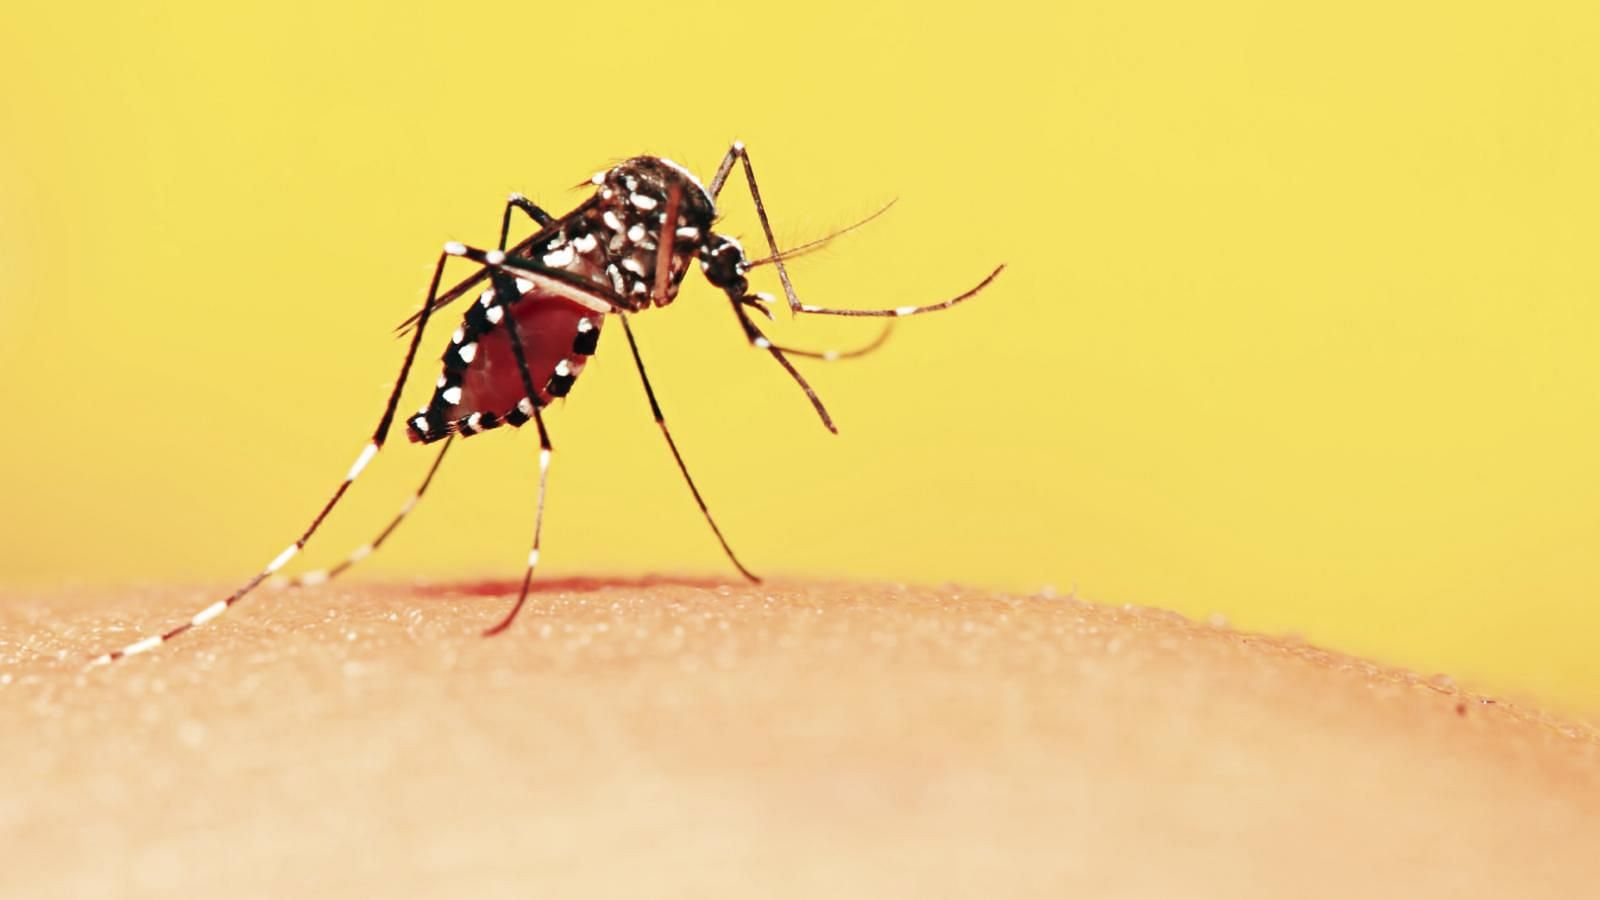 Malaria affects hundreds of millions of people around the world.